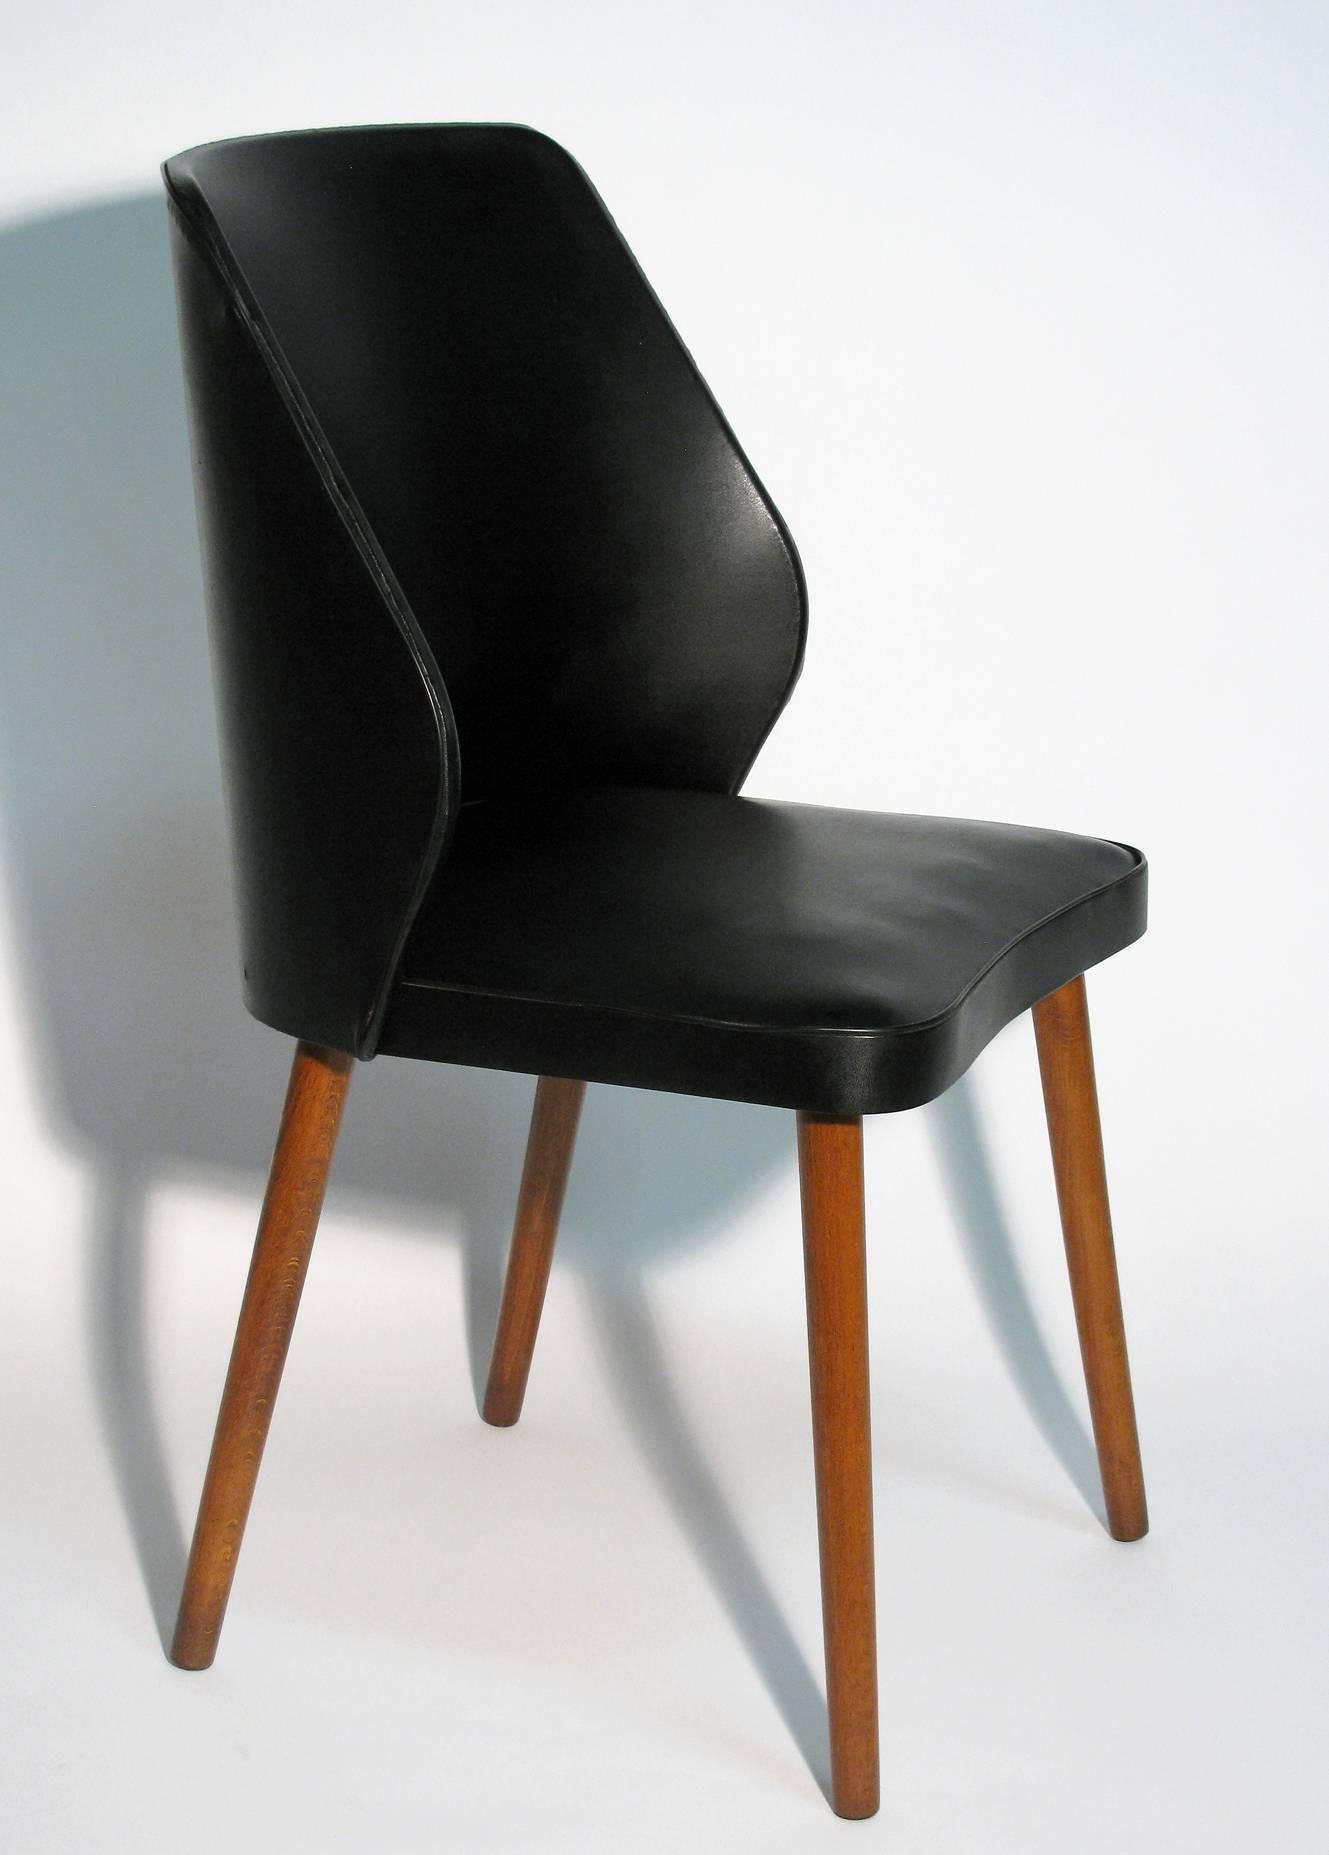 Mid-Century Modern Danish Modernist Occasional Chair For Sale